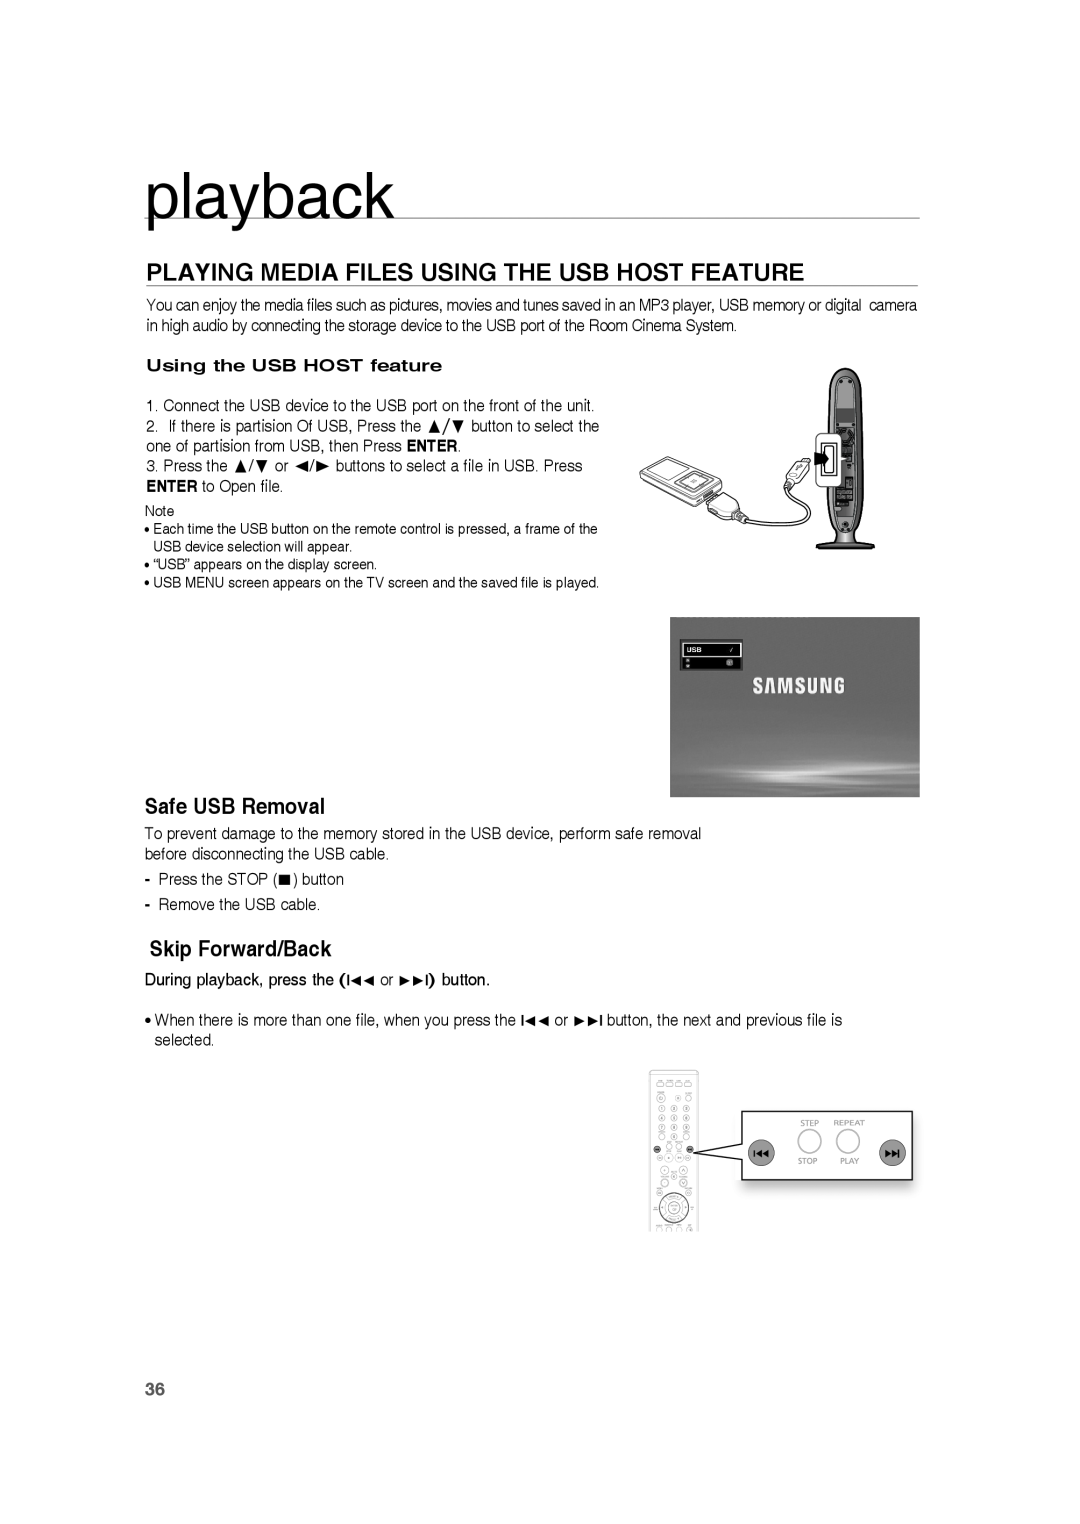 Samsung HE10T user manual Playing Media Files Using The Usb Host Feature, Safe USB Removal, Skip Forward/Back, playback 